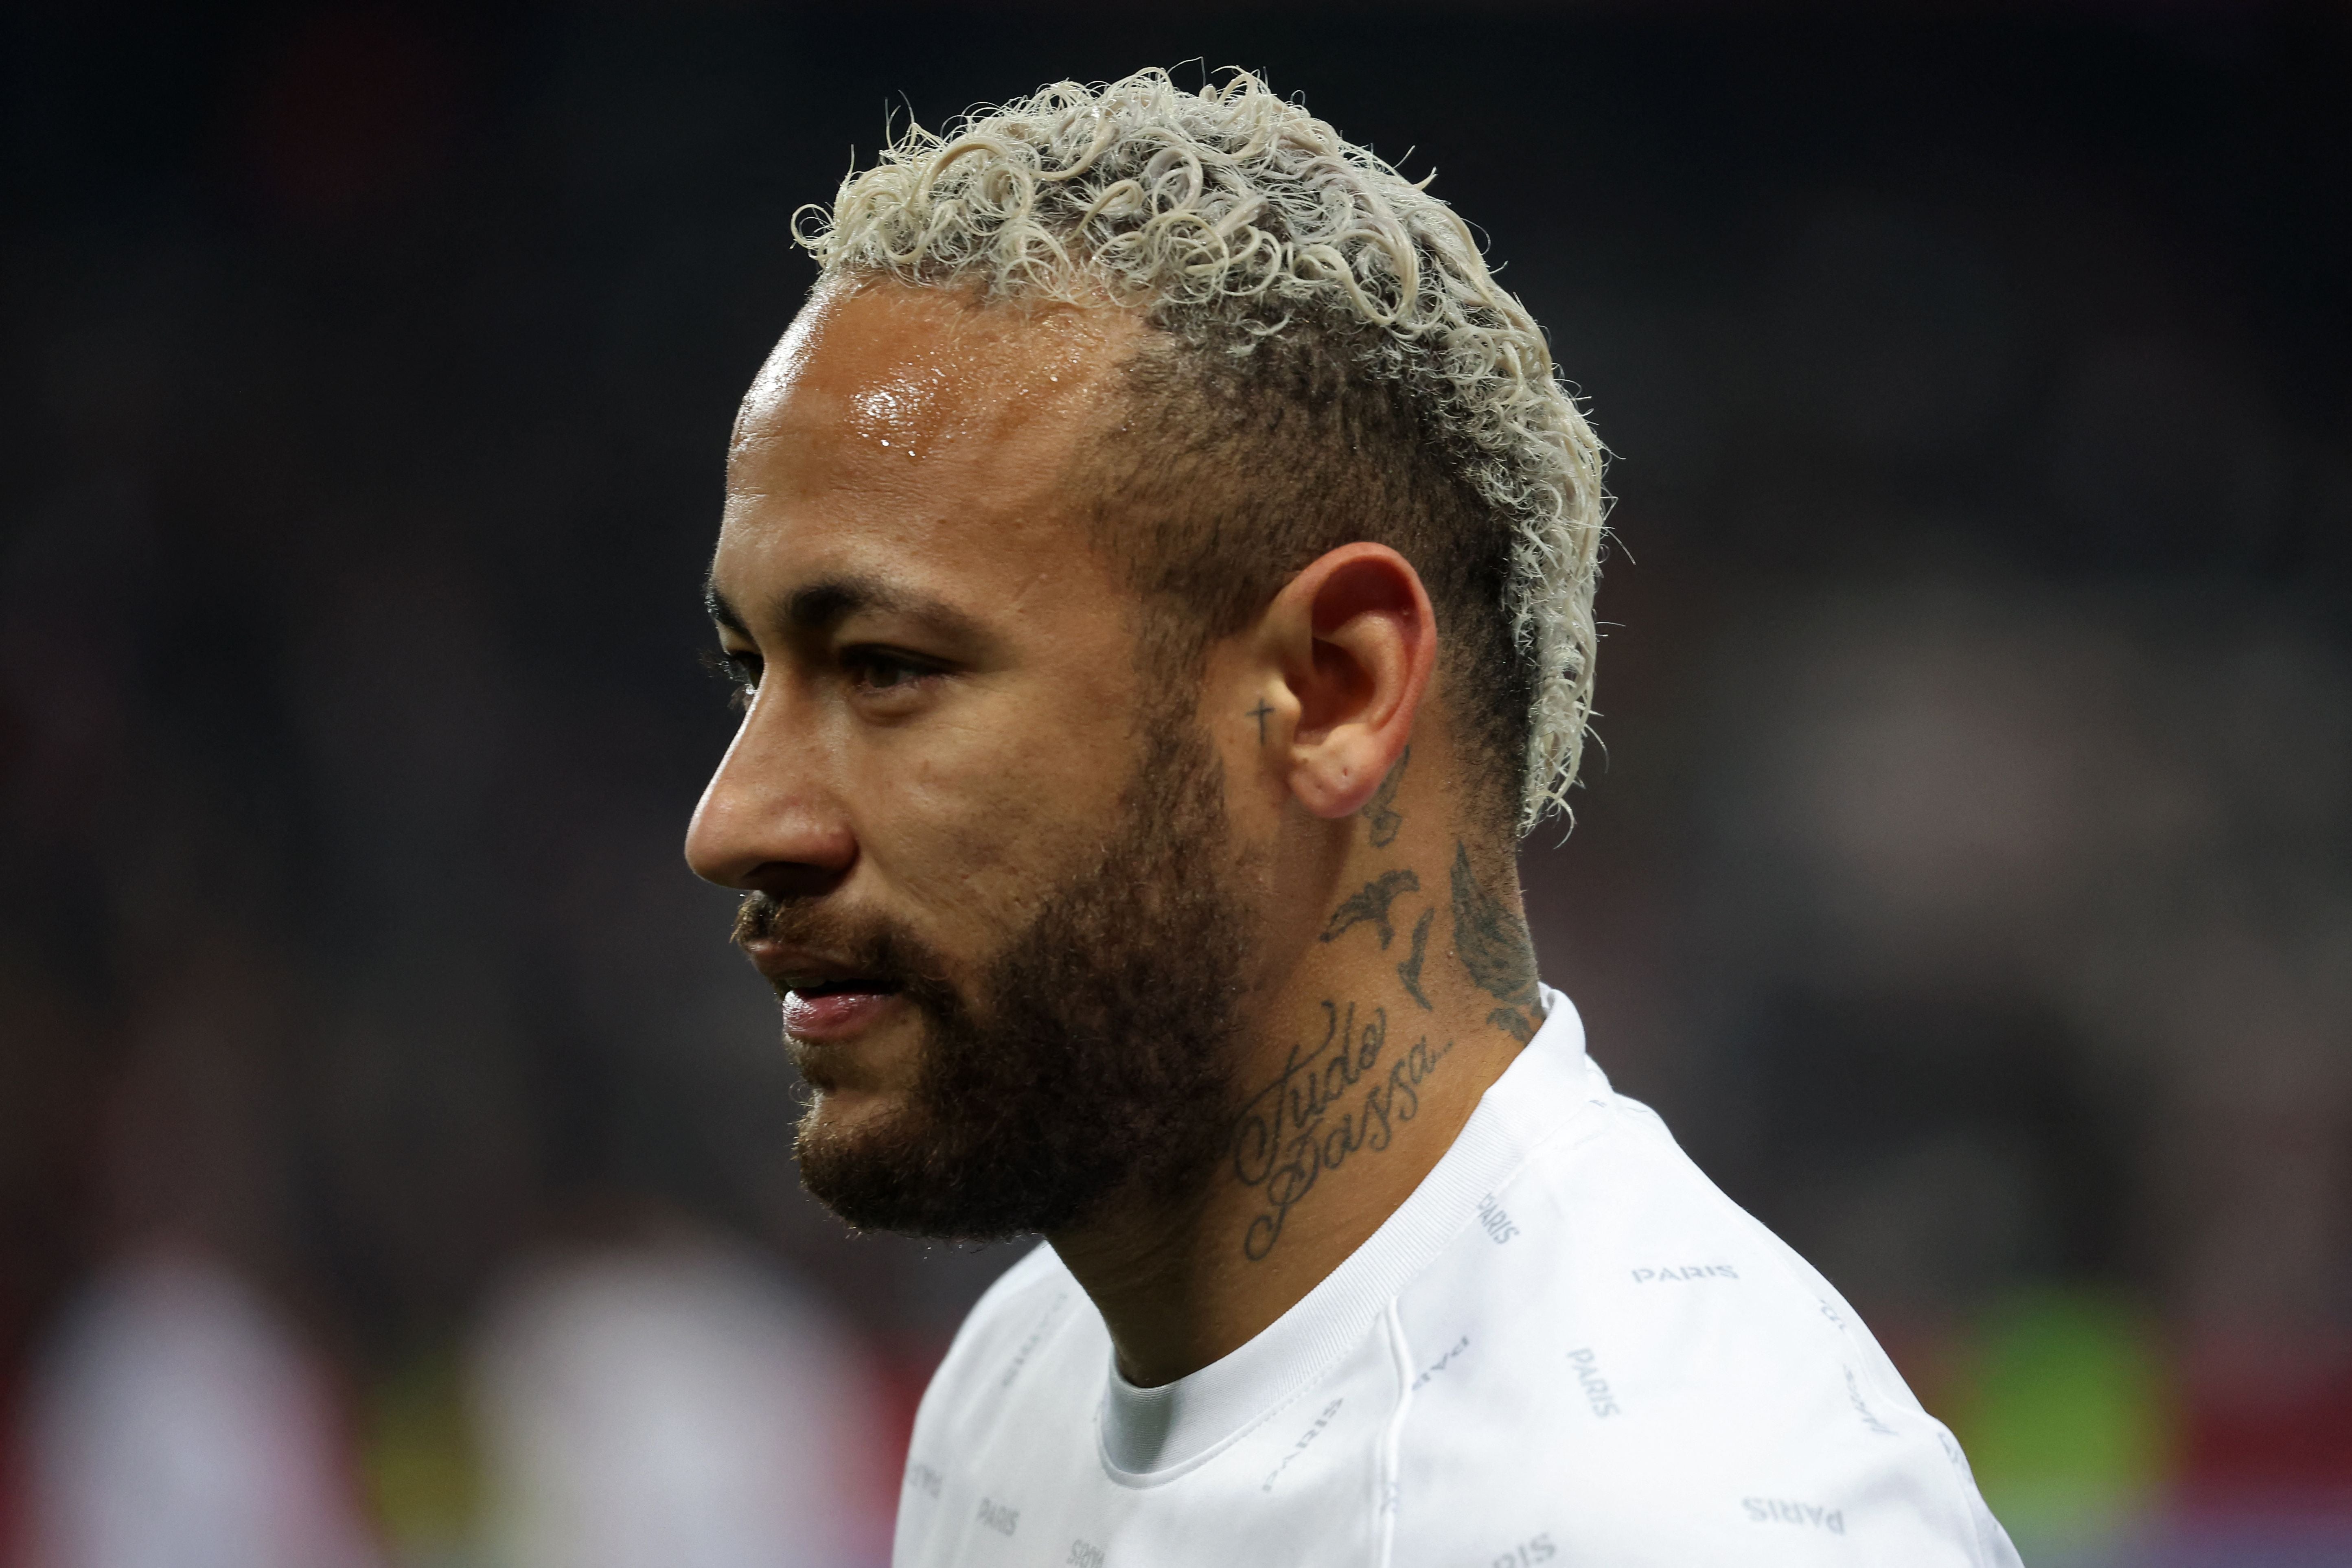 Thierry Henry has raised his fears about Neymar’s mental health